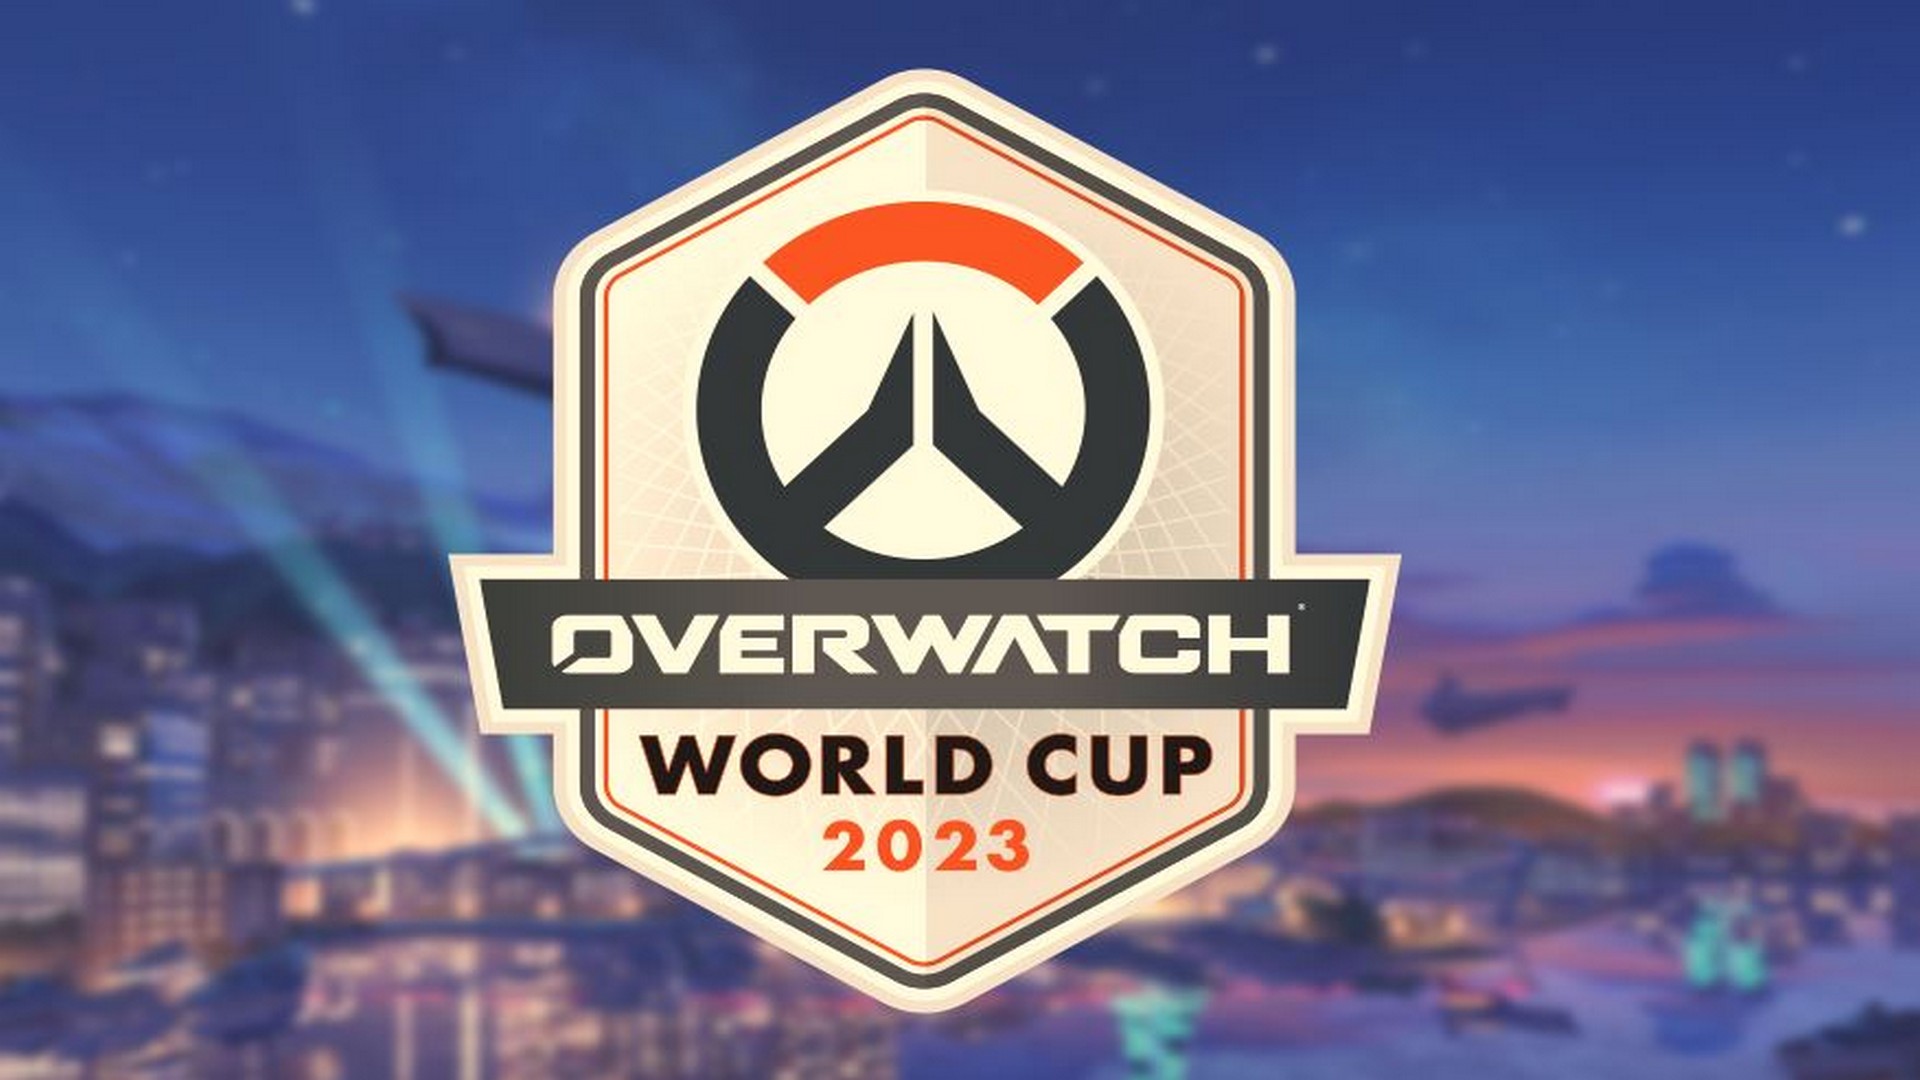 Get Ready For The Overwatch World Cup In 2023